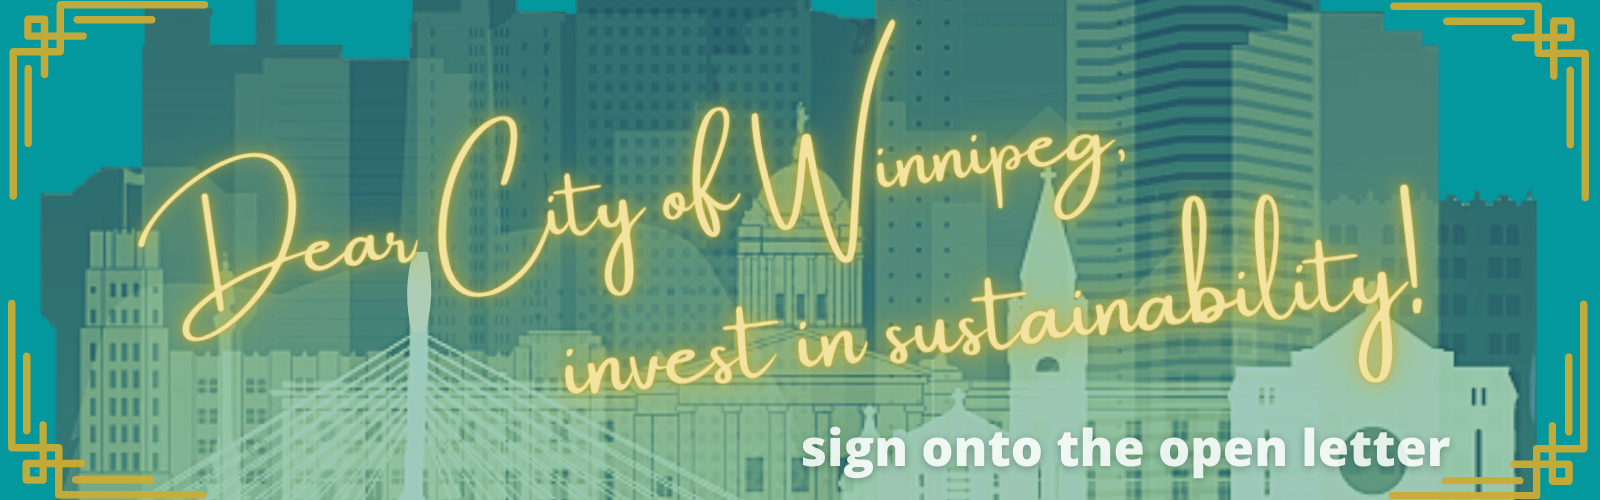 Dear City of Winnipeg invest in sustainbiility sign the open letter